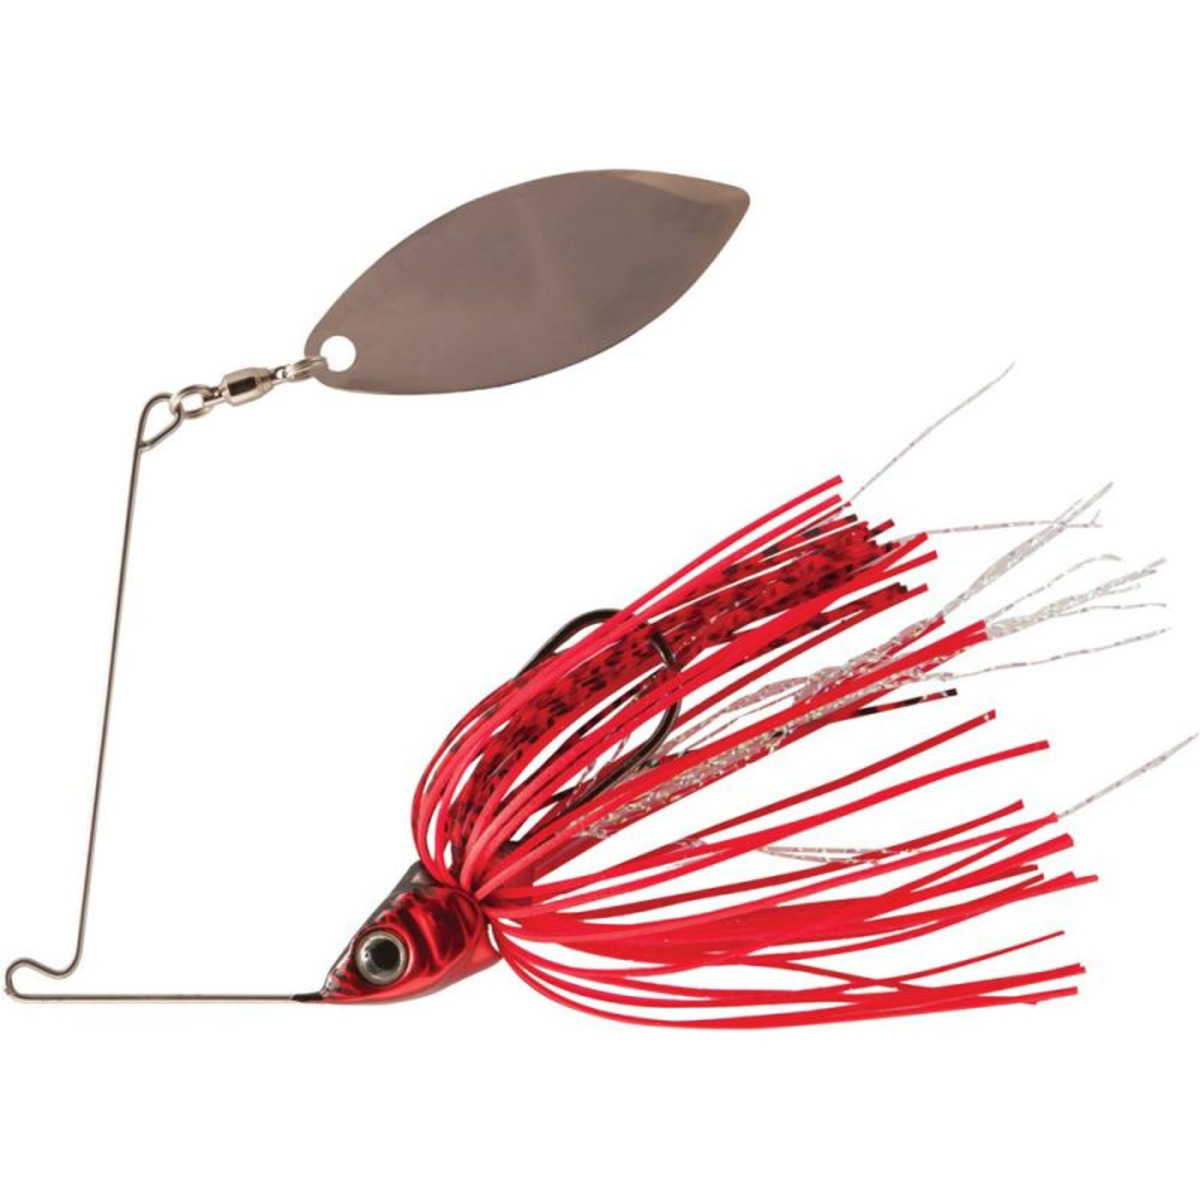 Rapture Sharp Spin Single Willow - 7.0 g - Red Hot